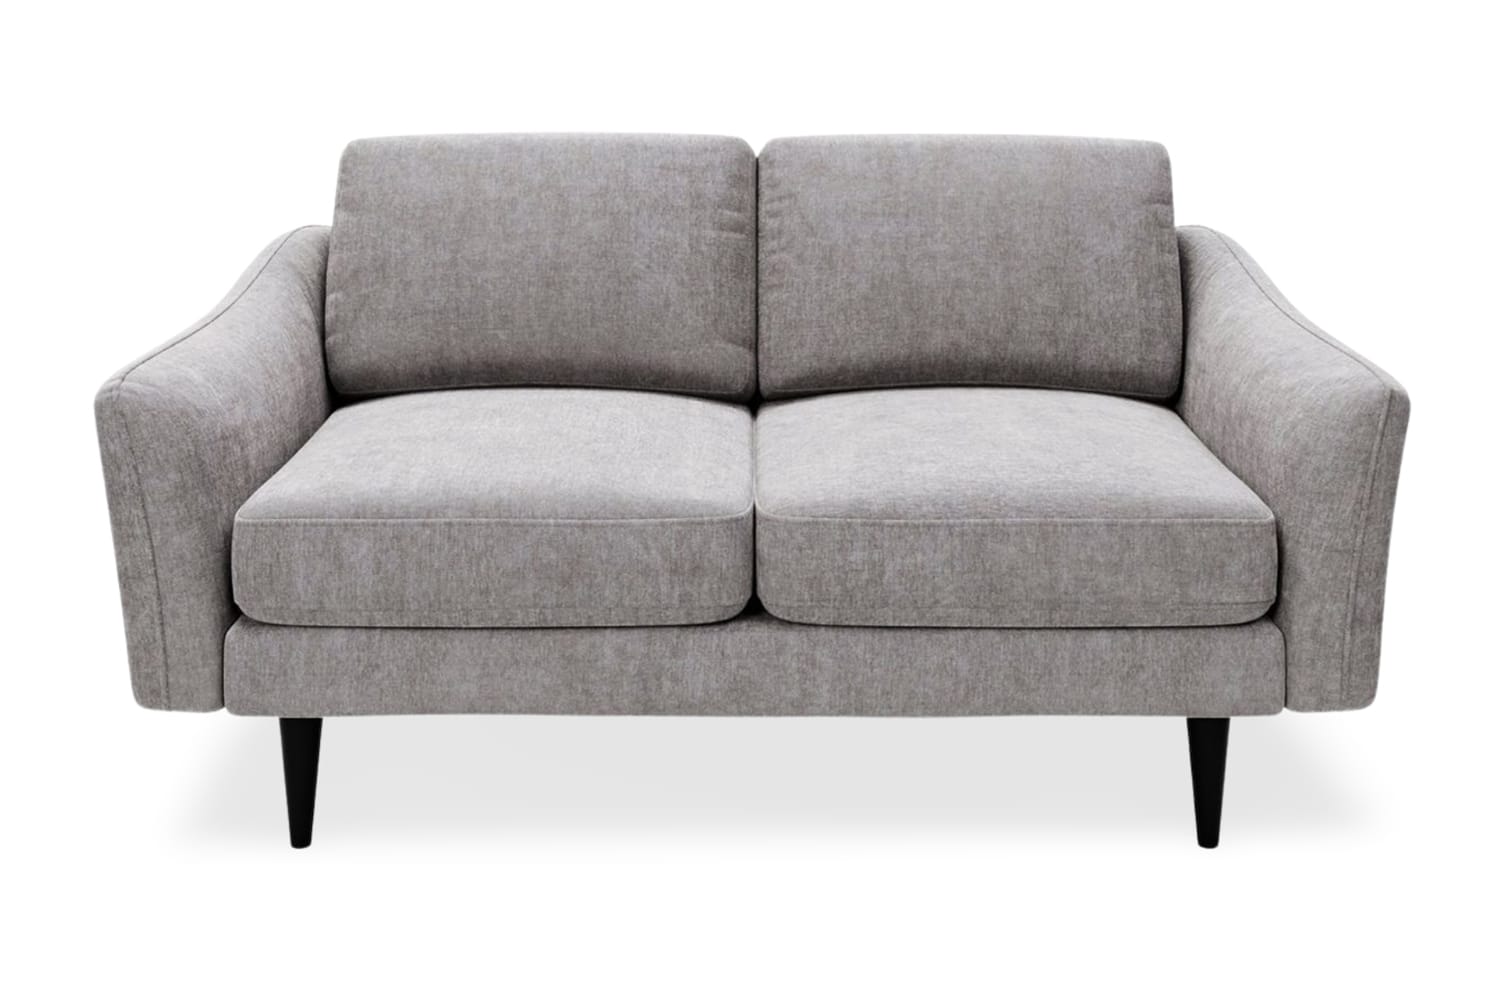 SNUG | The Rebel 2 Seater Sofa in Mid Grey variant_40414889410608